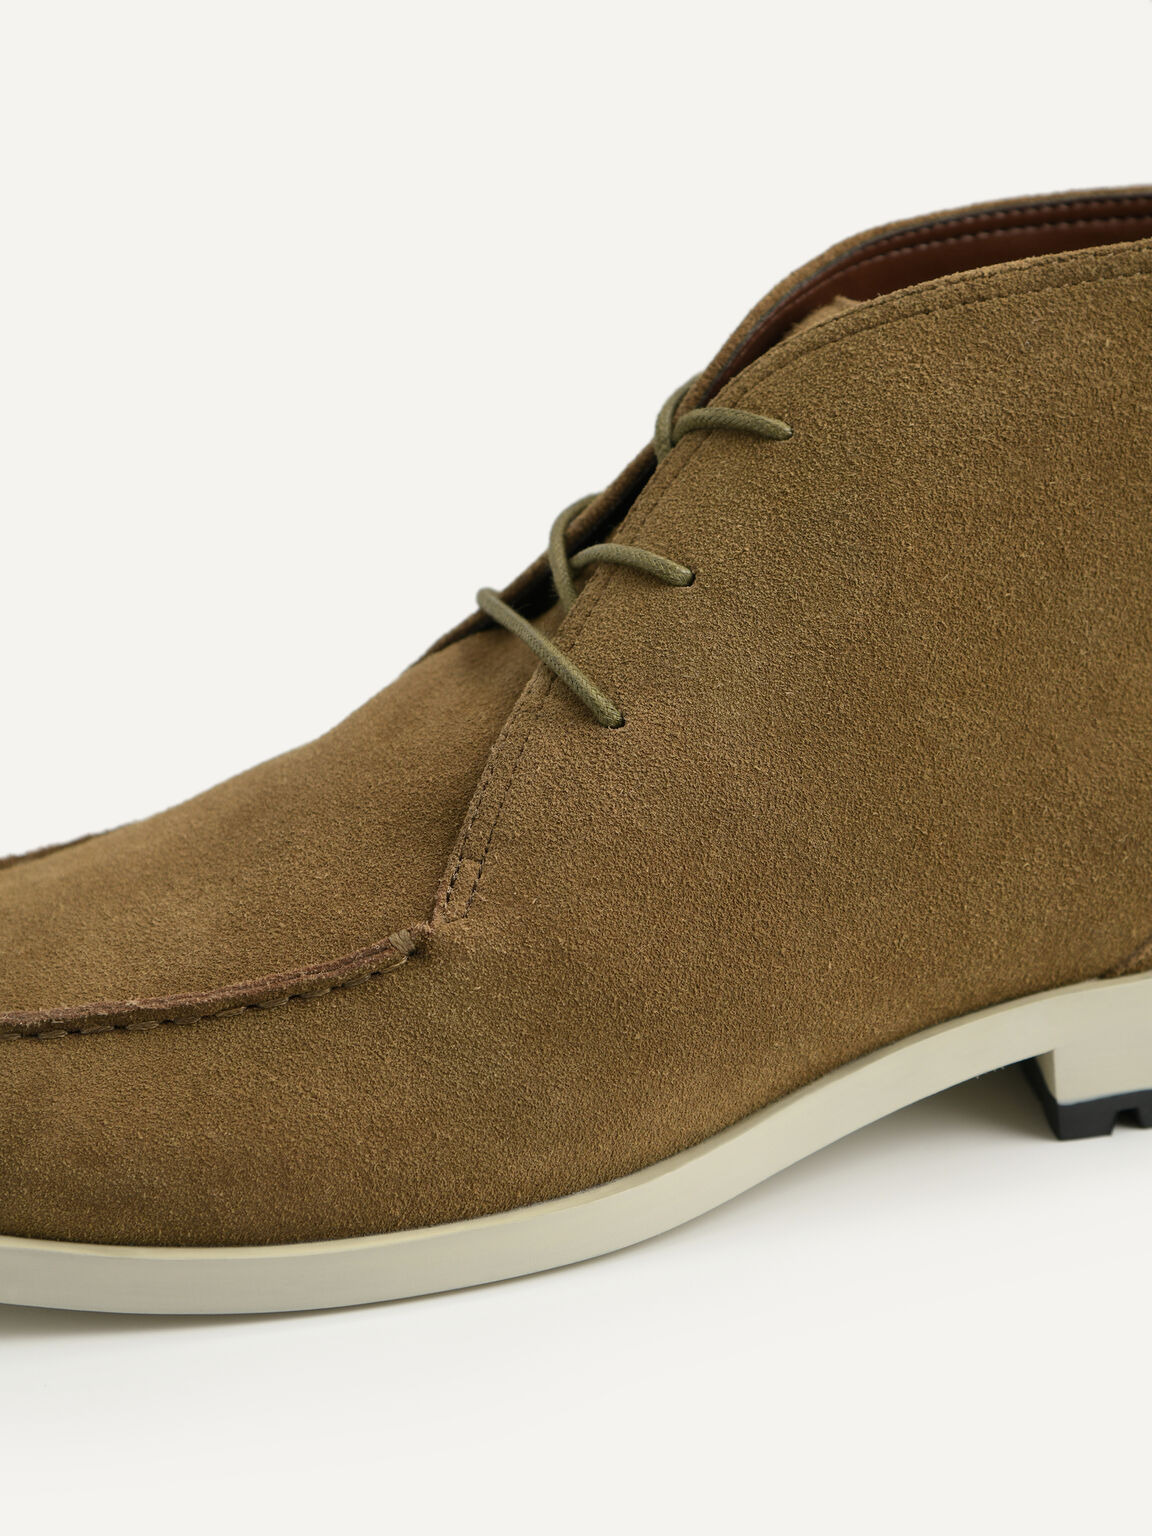 Suede Leather Boots, Olive